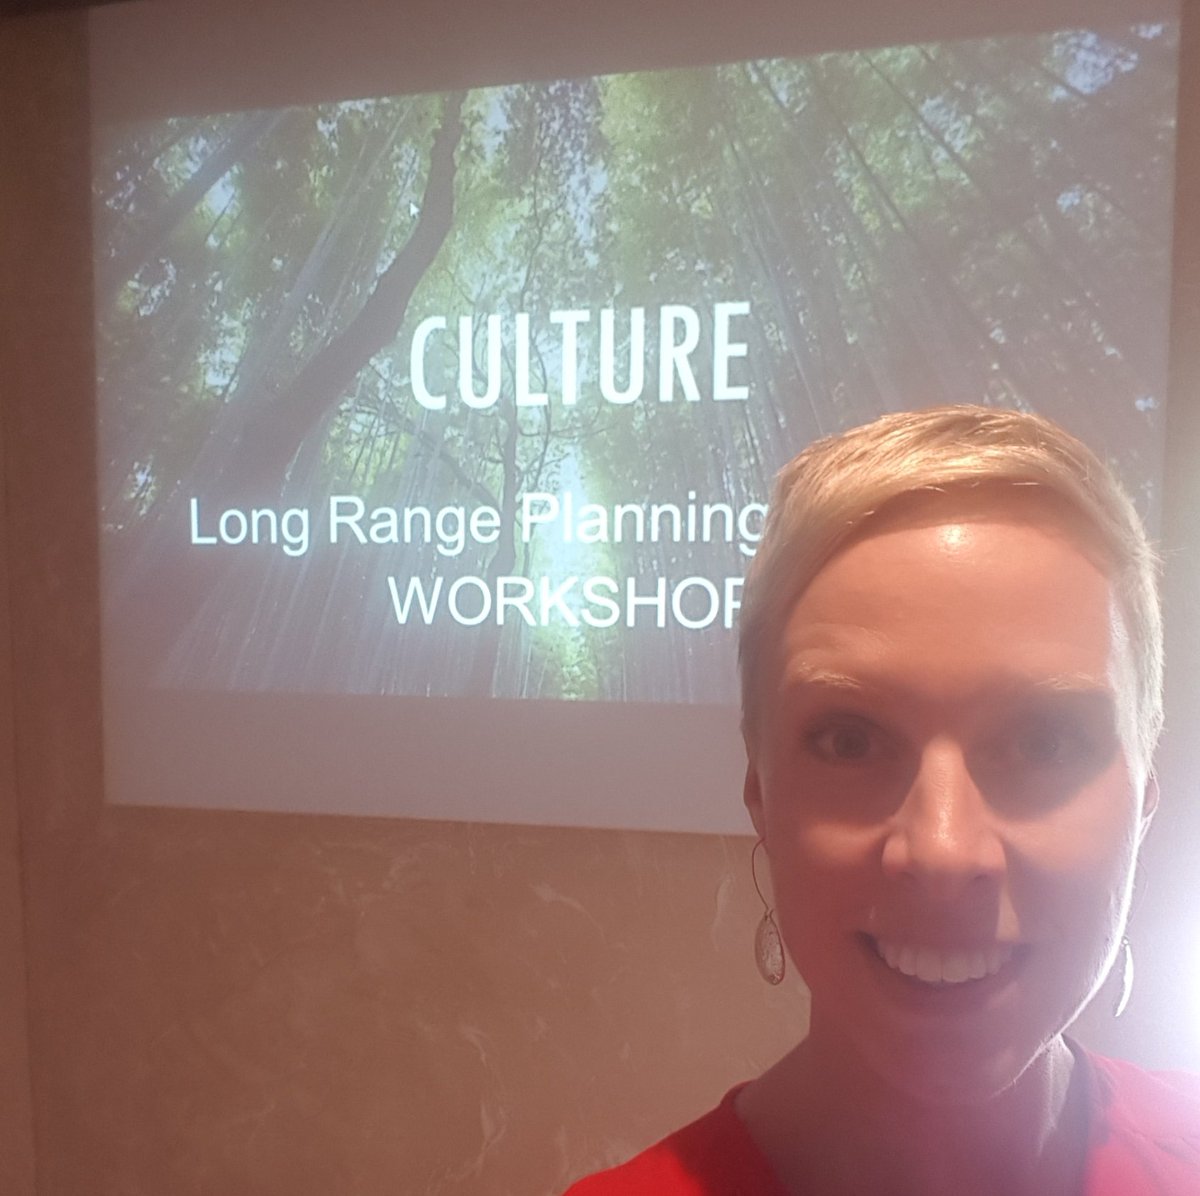 Hosting an interactive session on organizational culture with a great group of folks today, so grateful for another opportunity to facilitate! #facilitationmodeon #fosteringchange